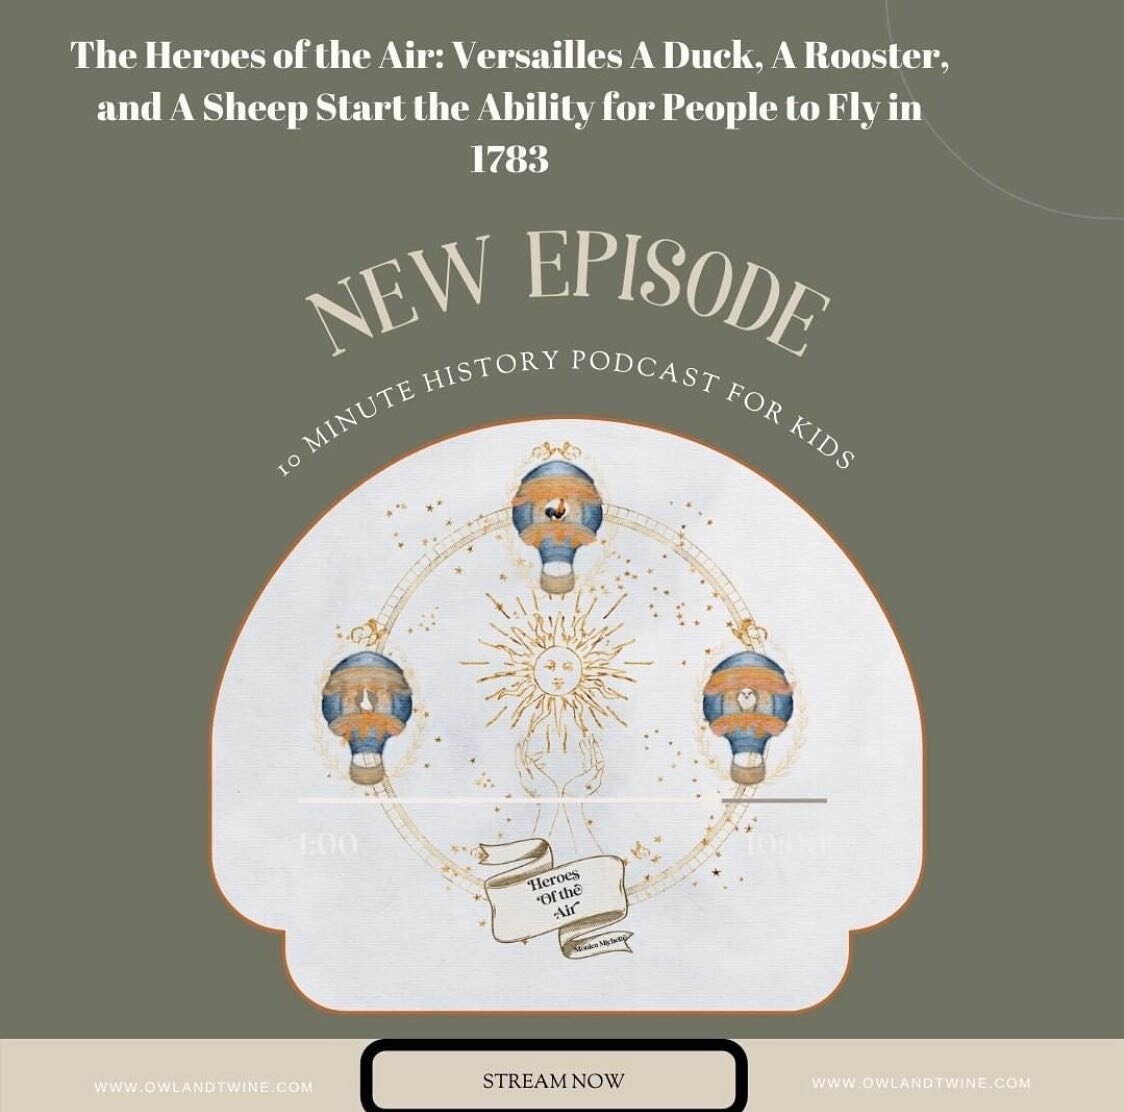 Have you heard the newest History Podcast for kids episode
The Heroes of the Air: Versailles A Duck, A Rooster, and A Sheep Start the Ability for People to Fly in 1783?
A duck, a Rooster, and a sheep wander into a wicker basket. This is not a joke it